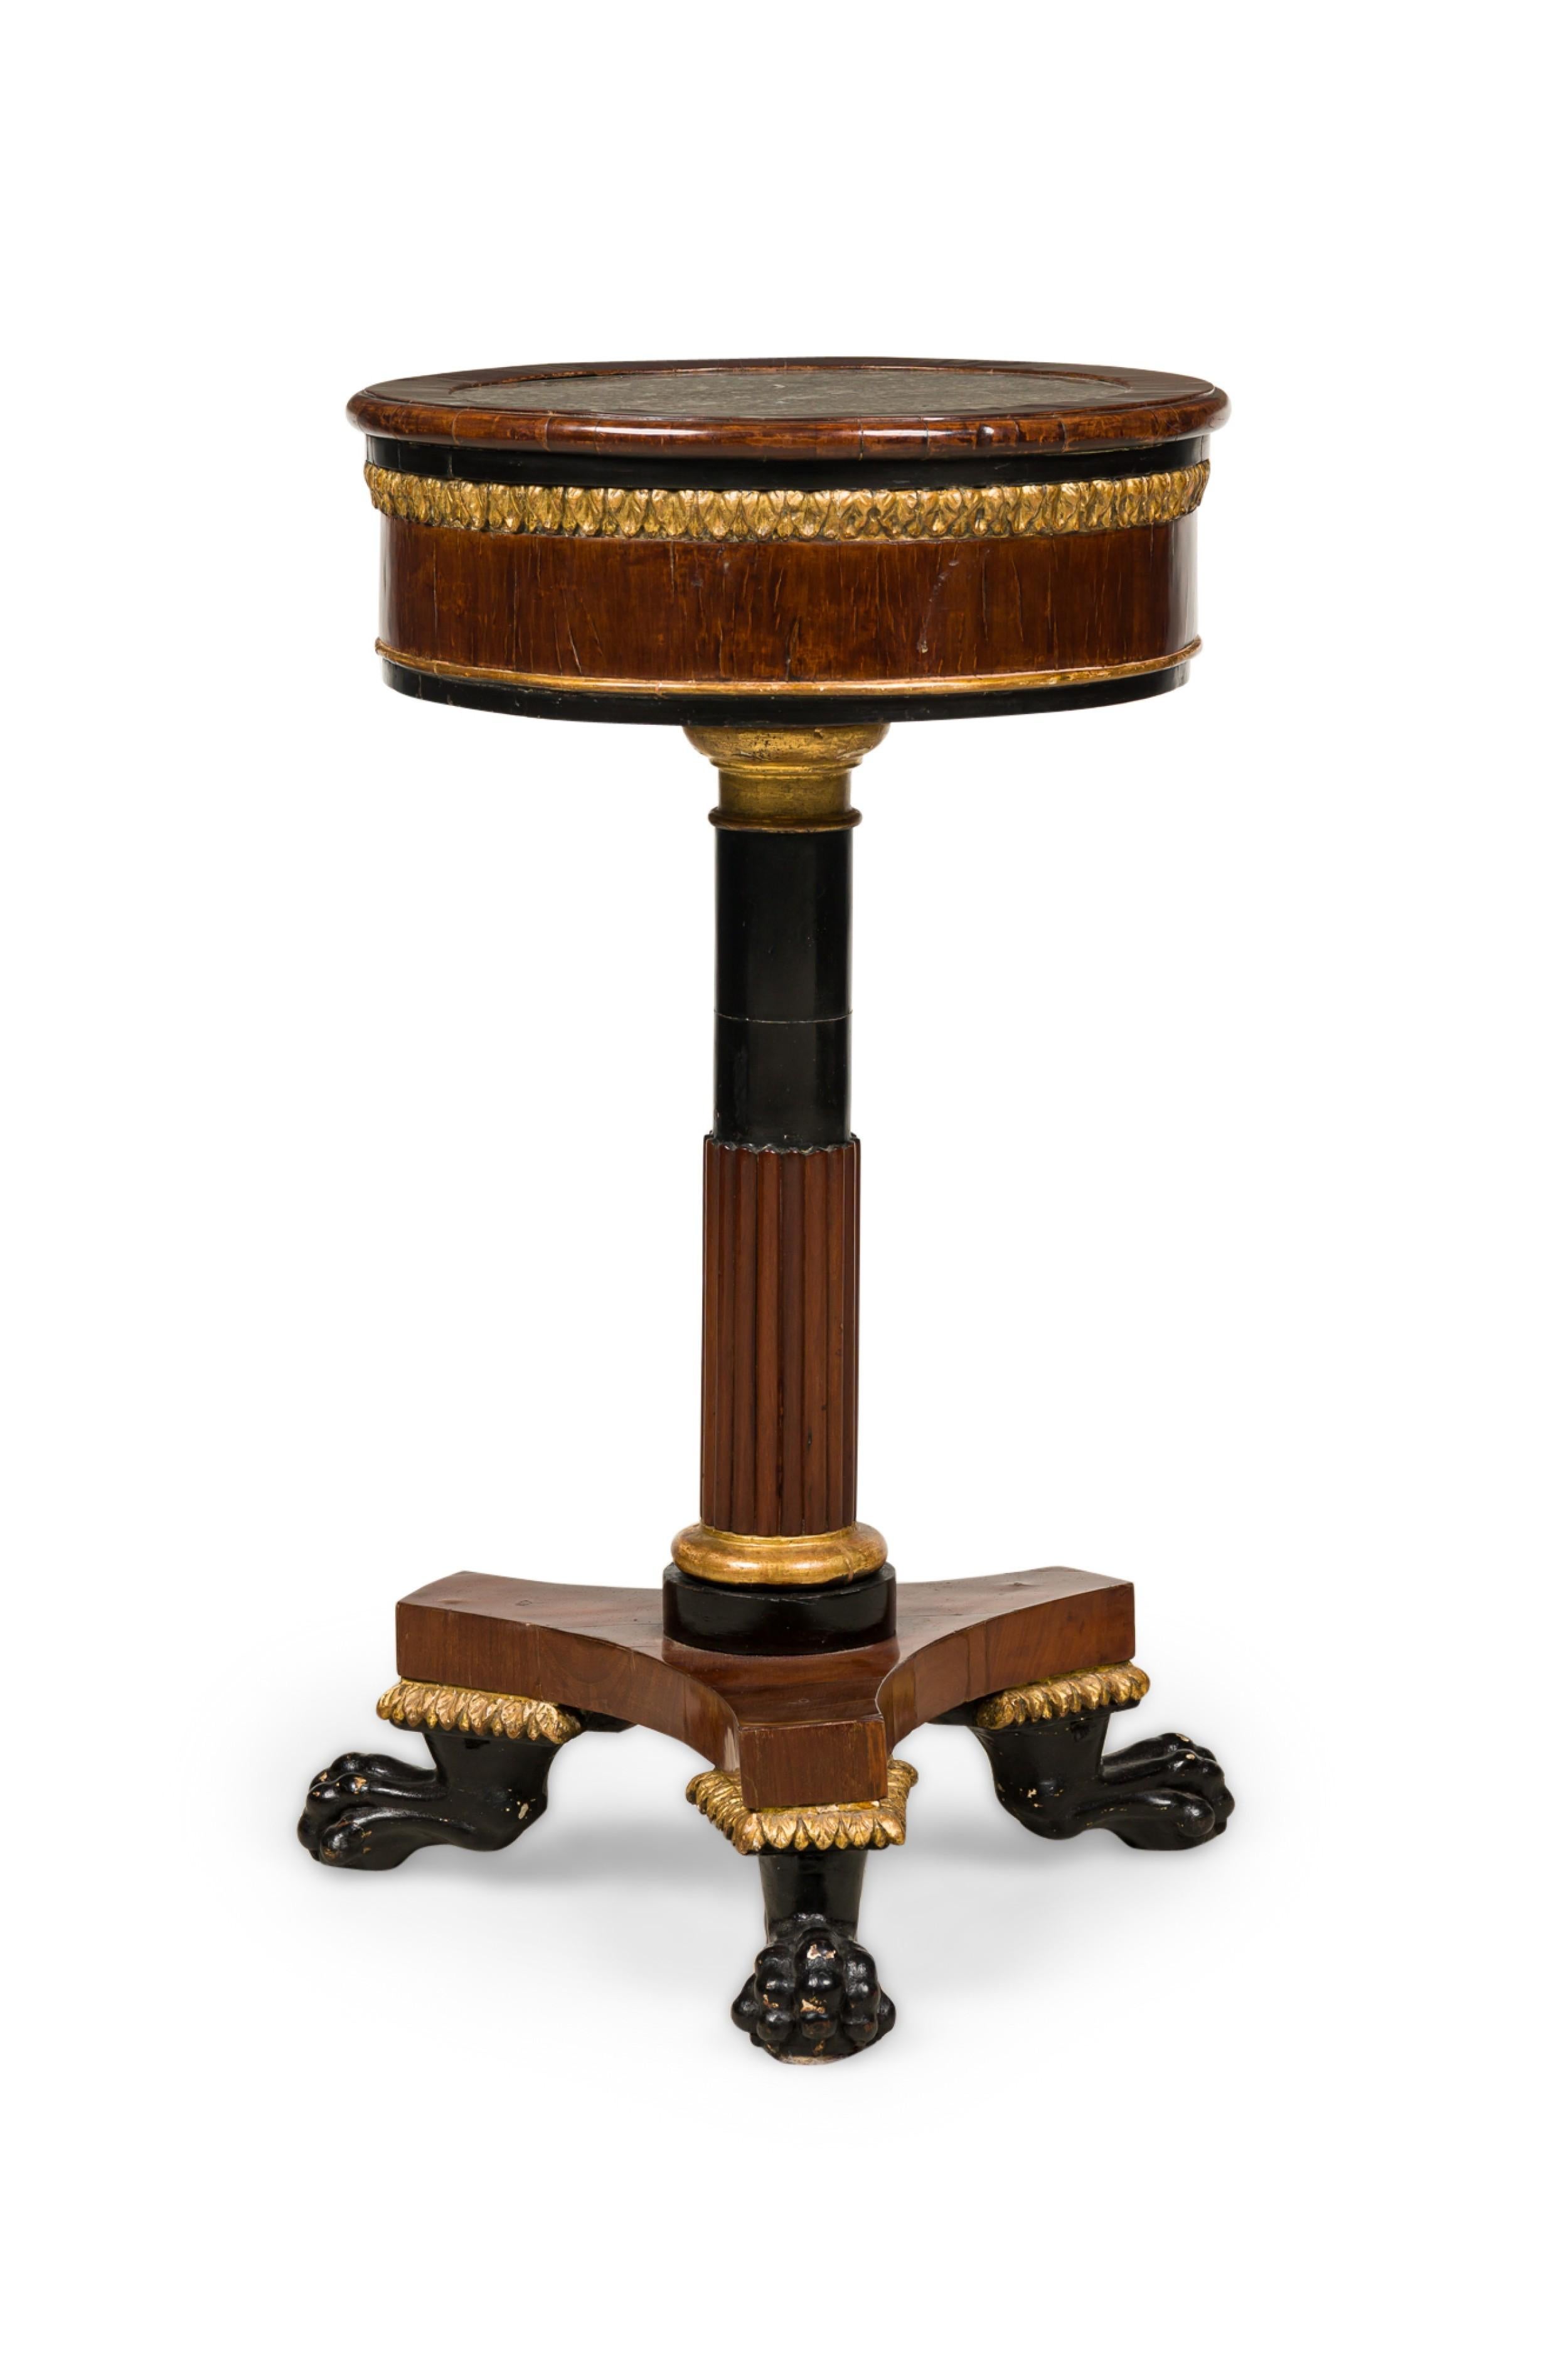 Pair of Italian Neoclassicalal Mahogany and Marble Gueirdon End Table For Sale 2